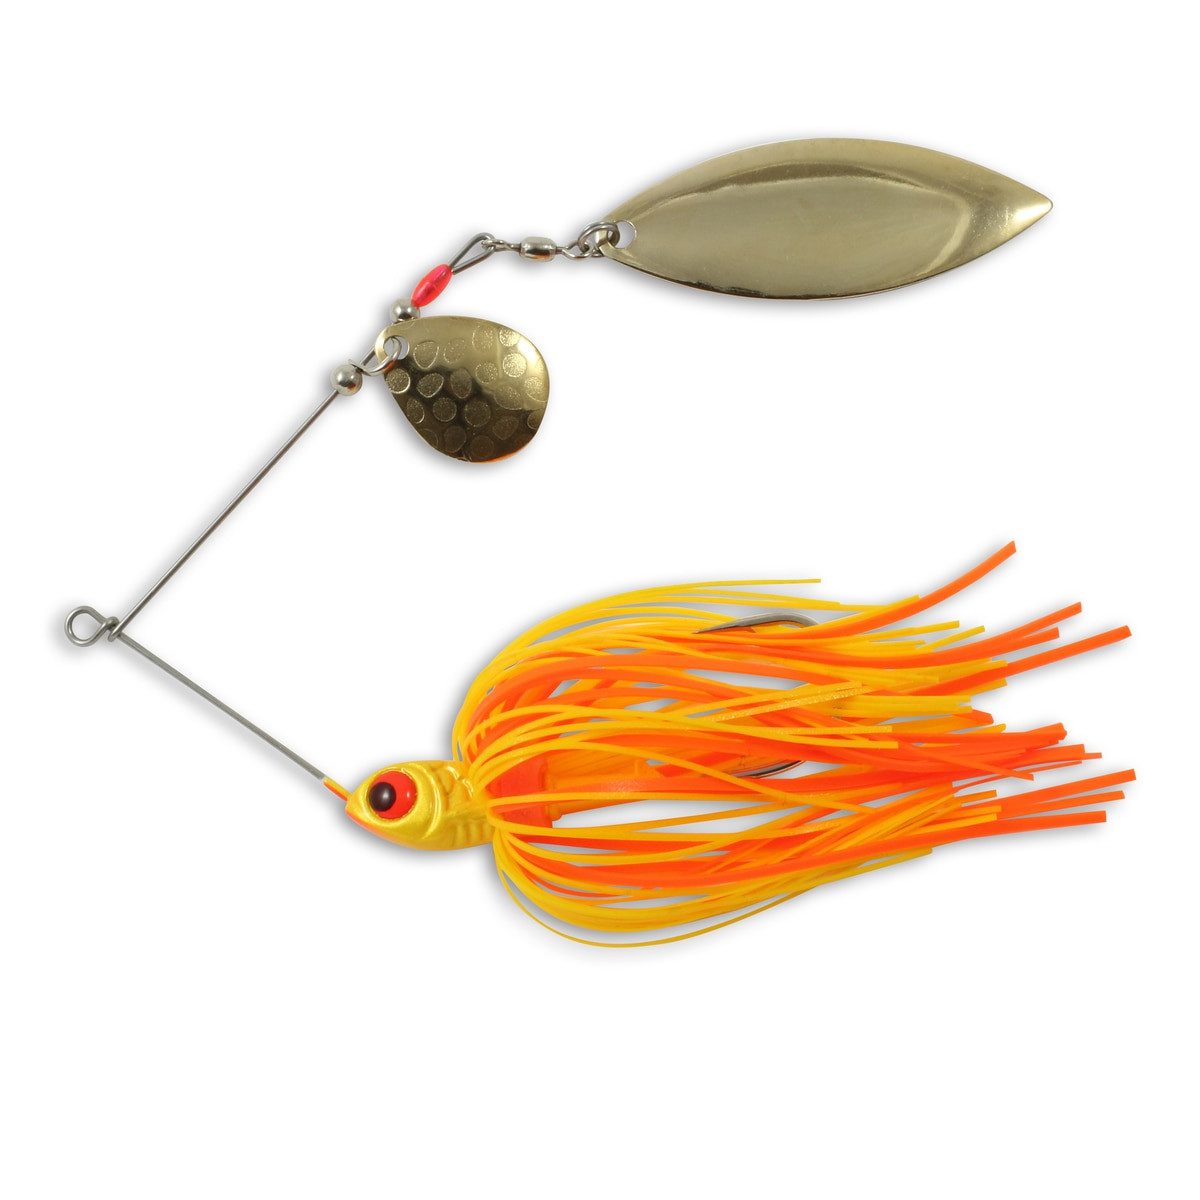 NORTHLAND FISHING TACKLE REED-RUNNER TANDEM SPIN - Northwoods